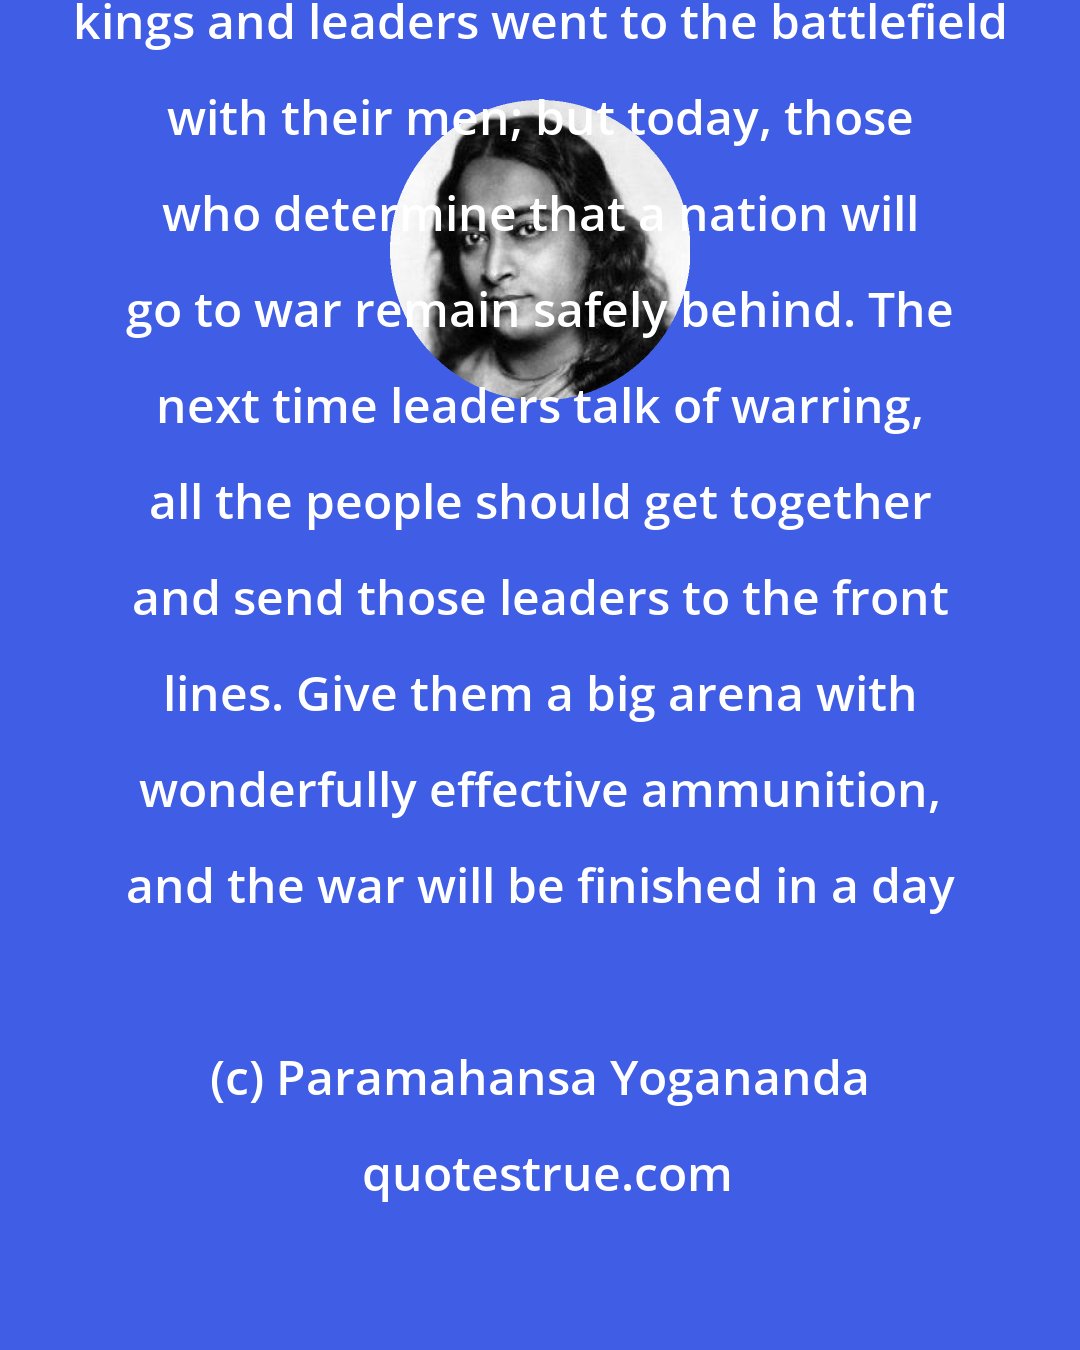 Paramahansa Yogananda: In the earlier days of history, kings and leaders went to the battlefield with their men; but today, those who determine that a nation will go to war remain safely behind. The next time leaders talk of warring, all the people should get together and send those leaders to the front lines. Give them a big arena with wonderfully effective ammunition, and the war will be finished in a day